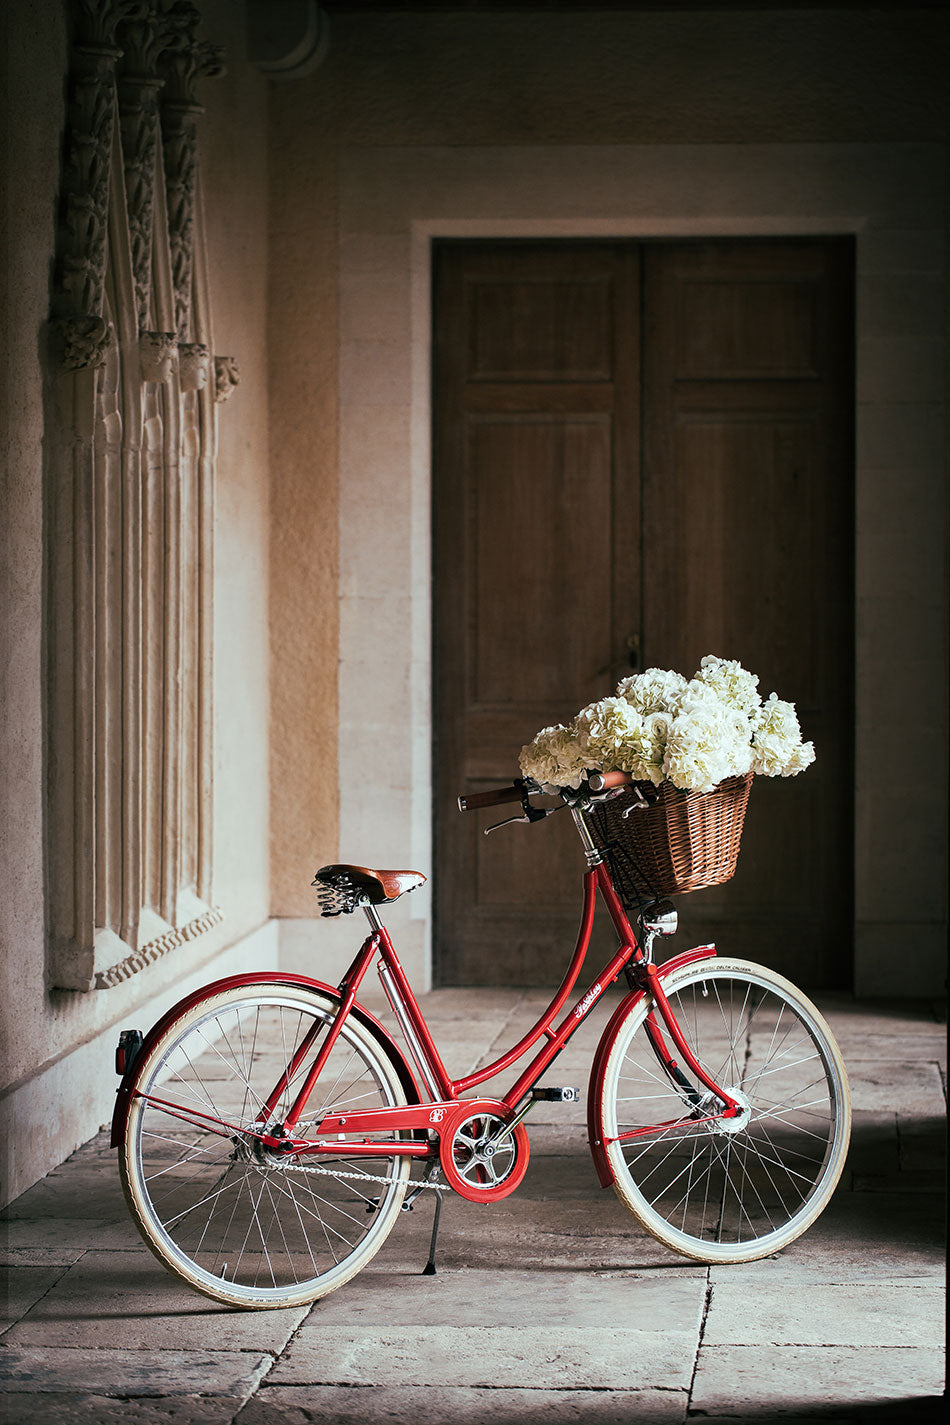 A red vintage bicycle with a leather saddle and large wicker basket full of white hydrangea flowers.